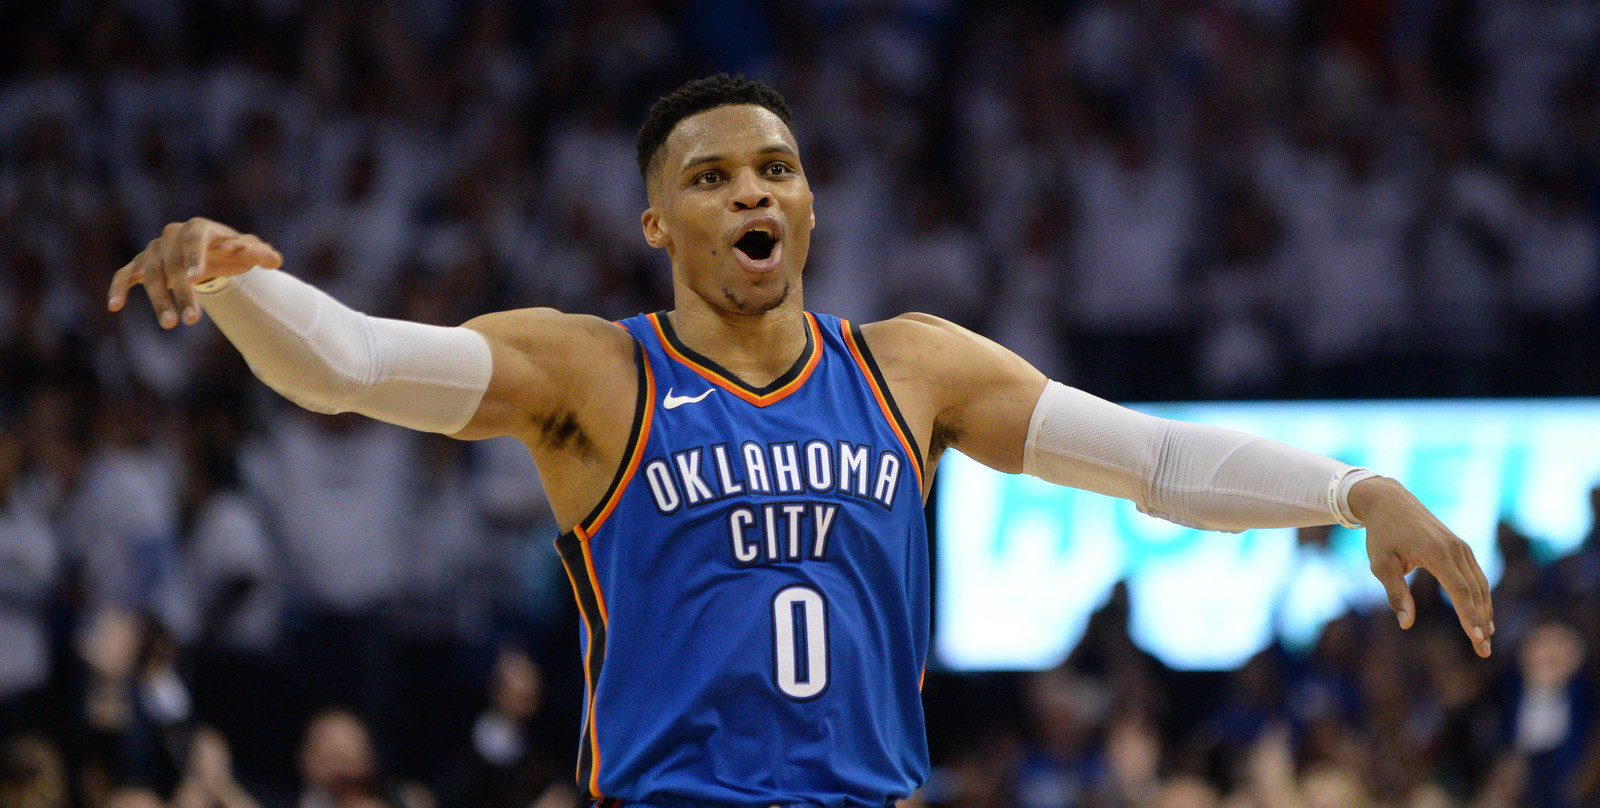 Russell Westbrook sous le maillot du Thunder